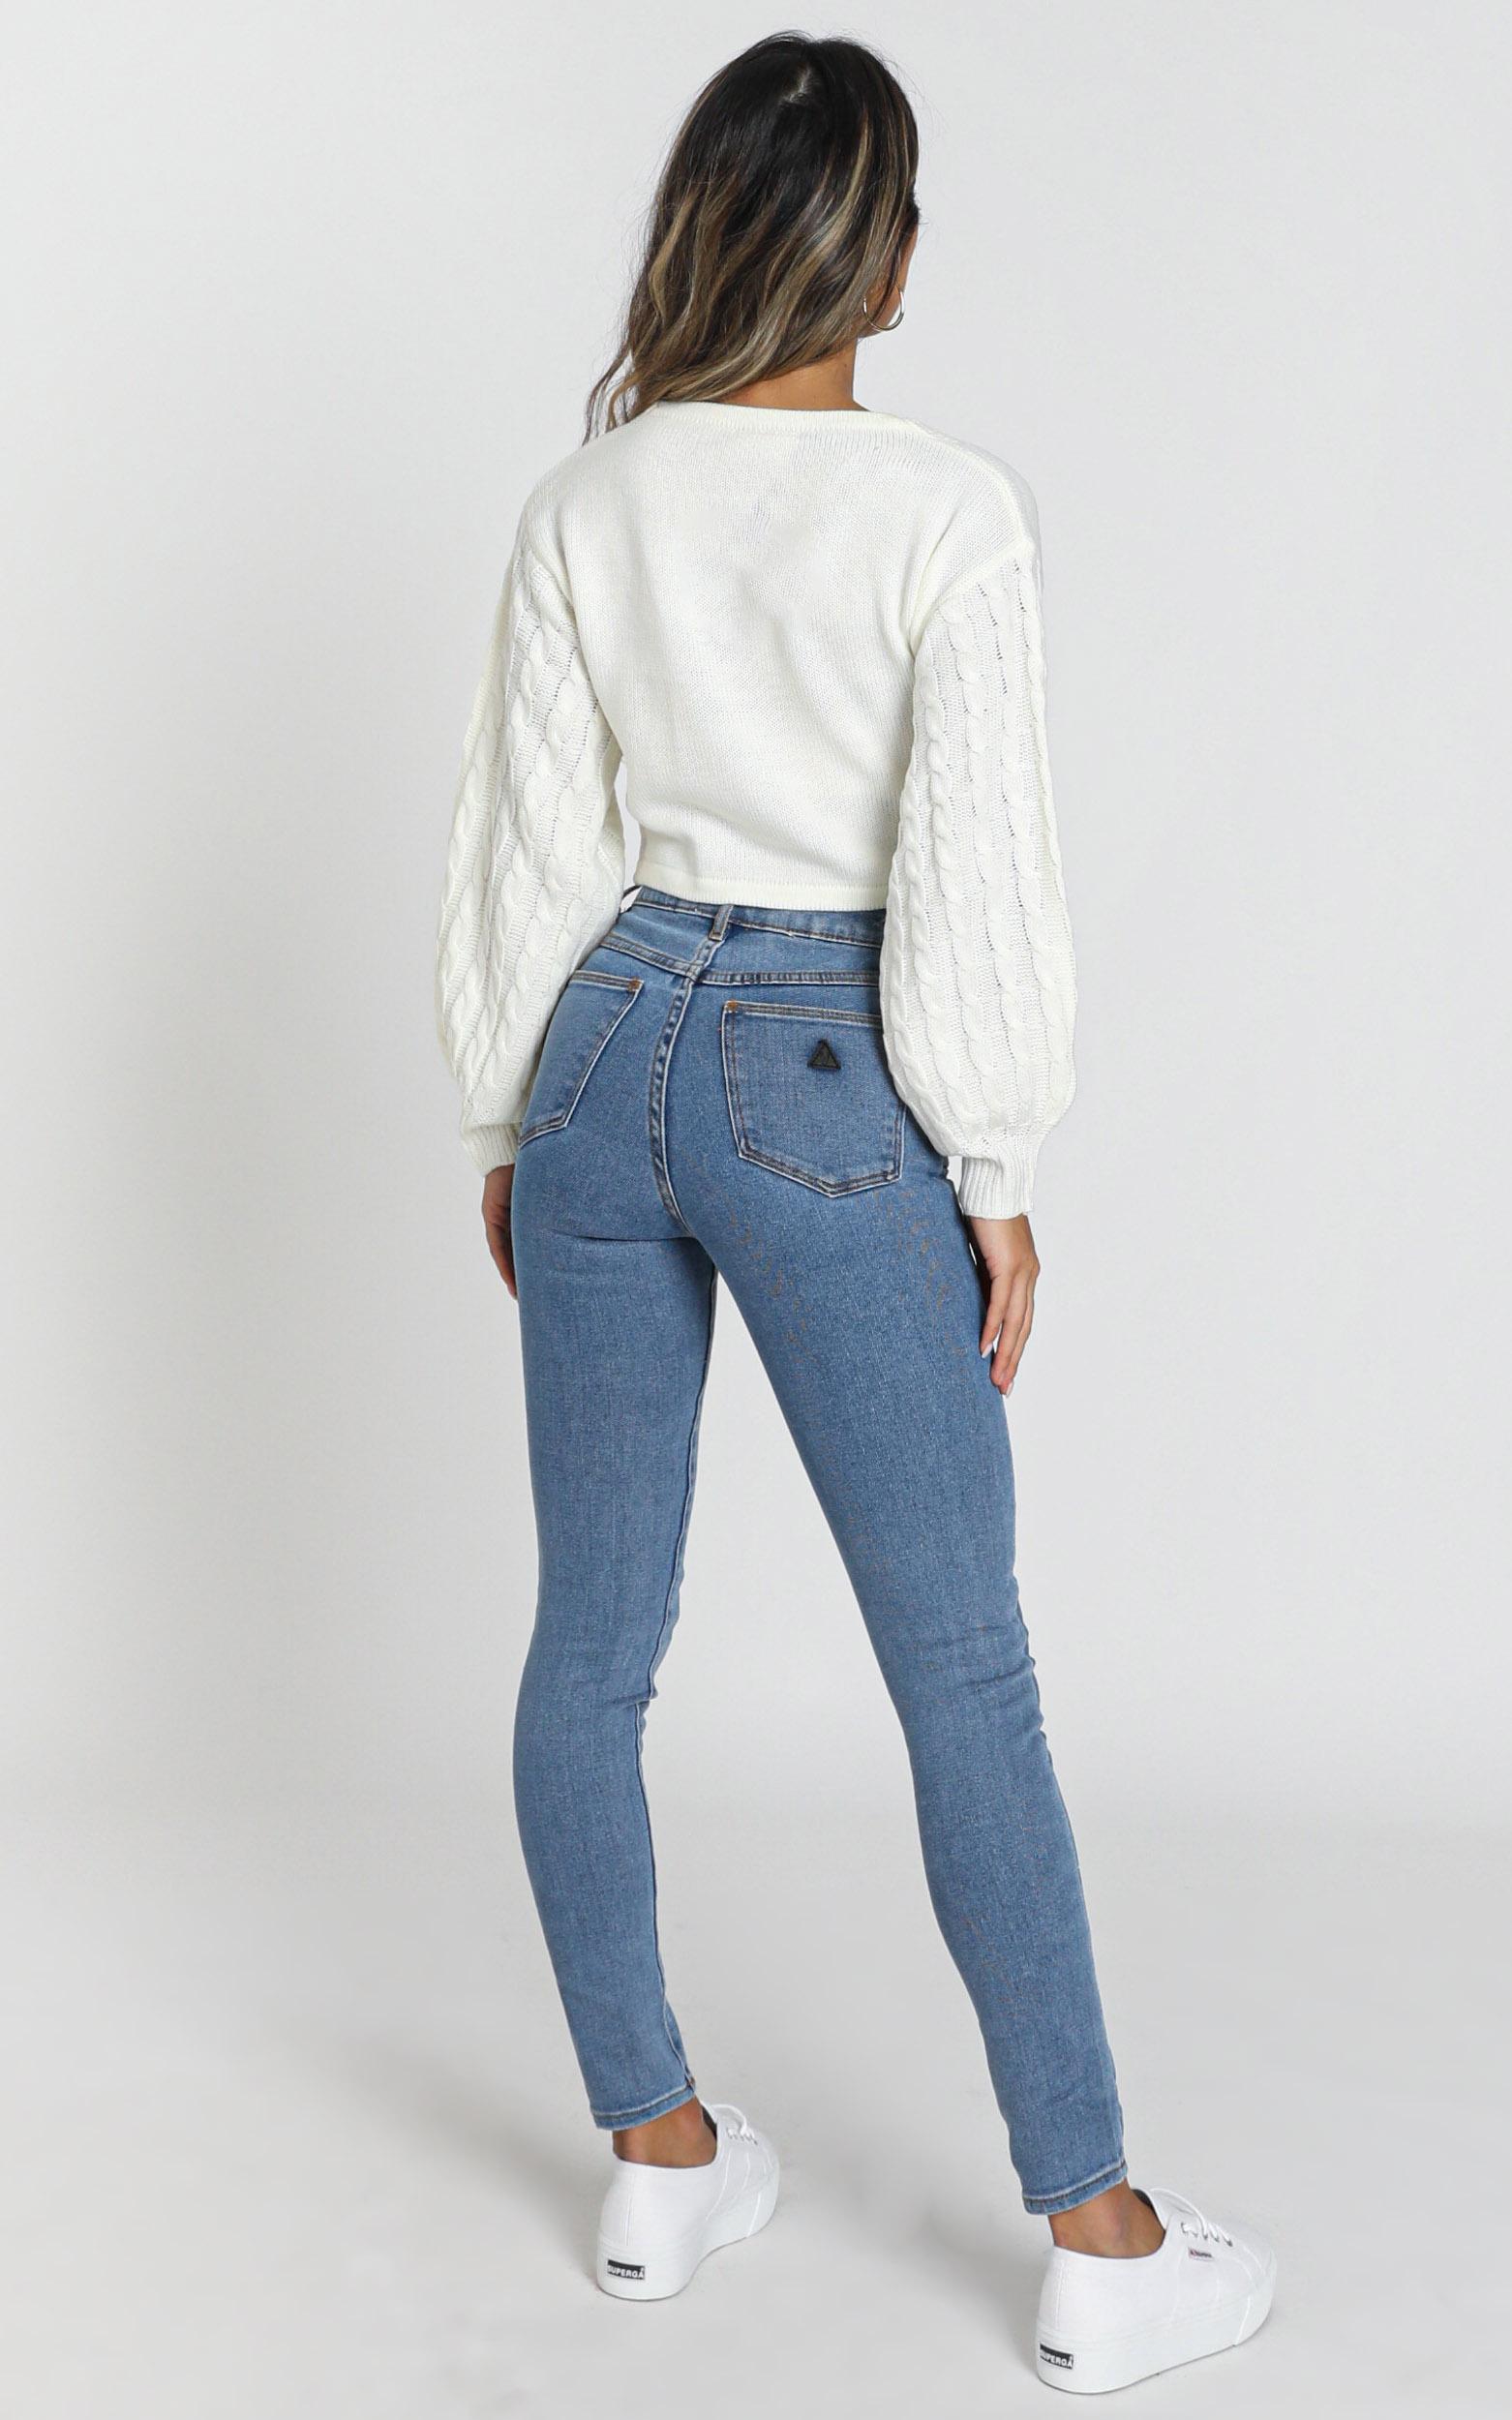 a high skinny ankle basher jeans in la blues denim